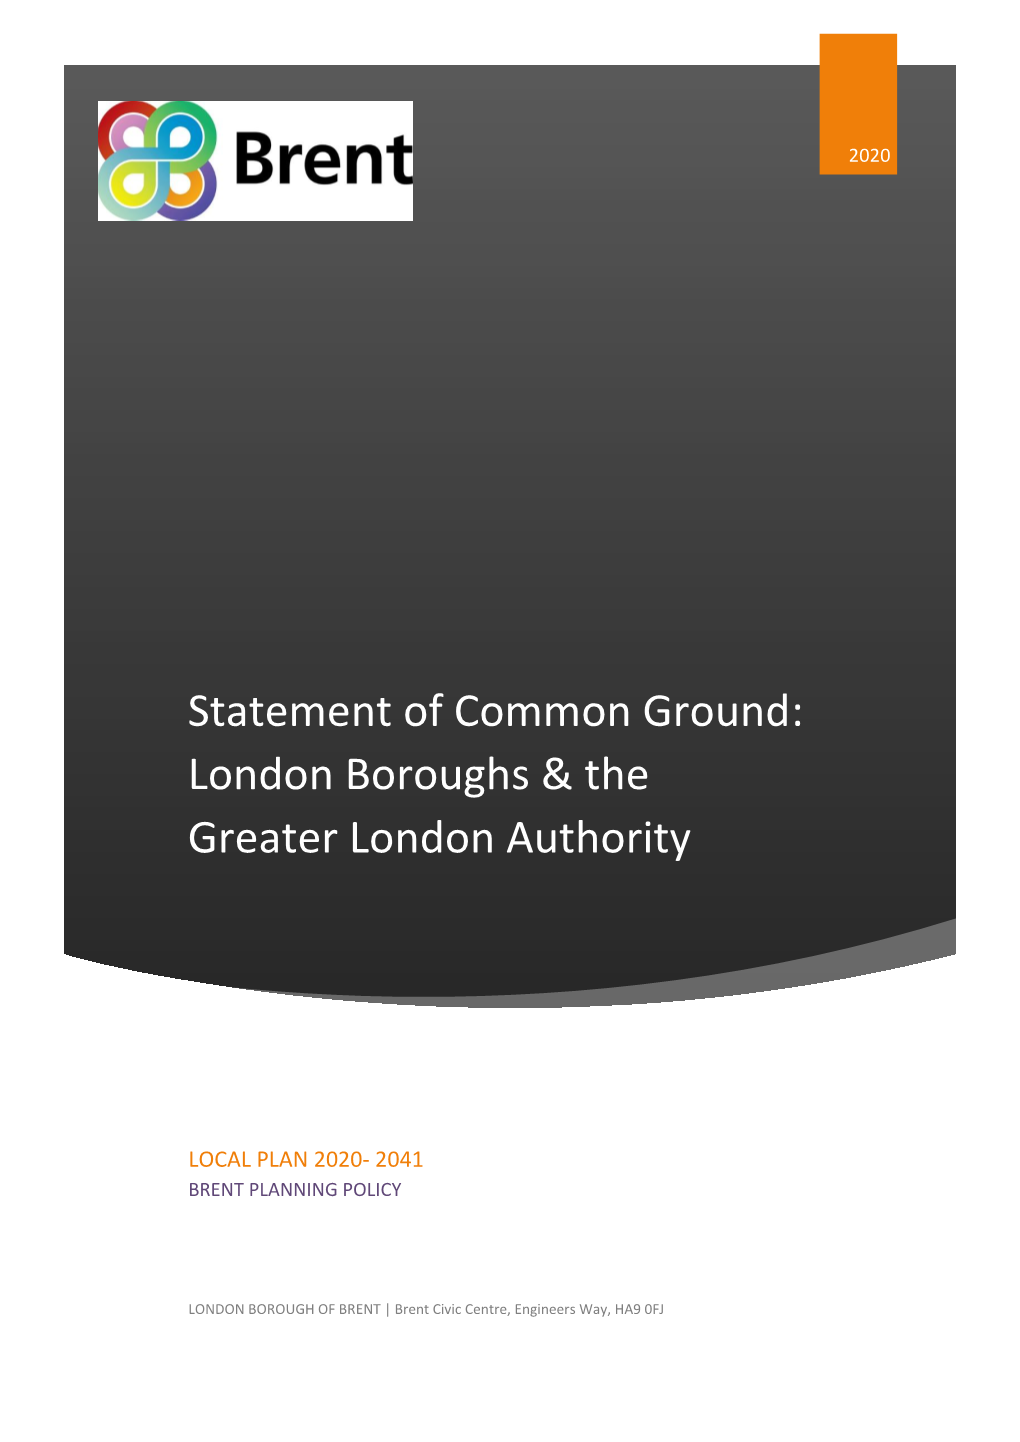 Statement of Common Ground: London Boroughs & the Greater London Authority